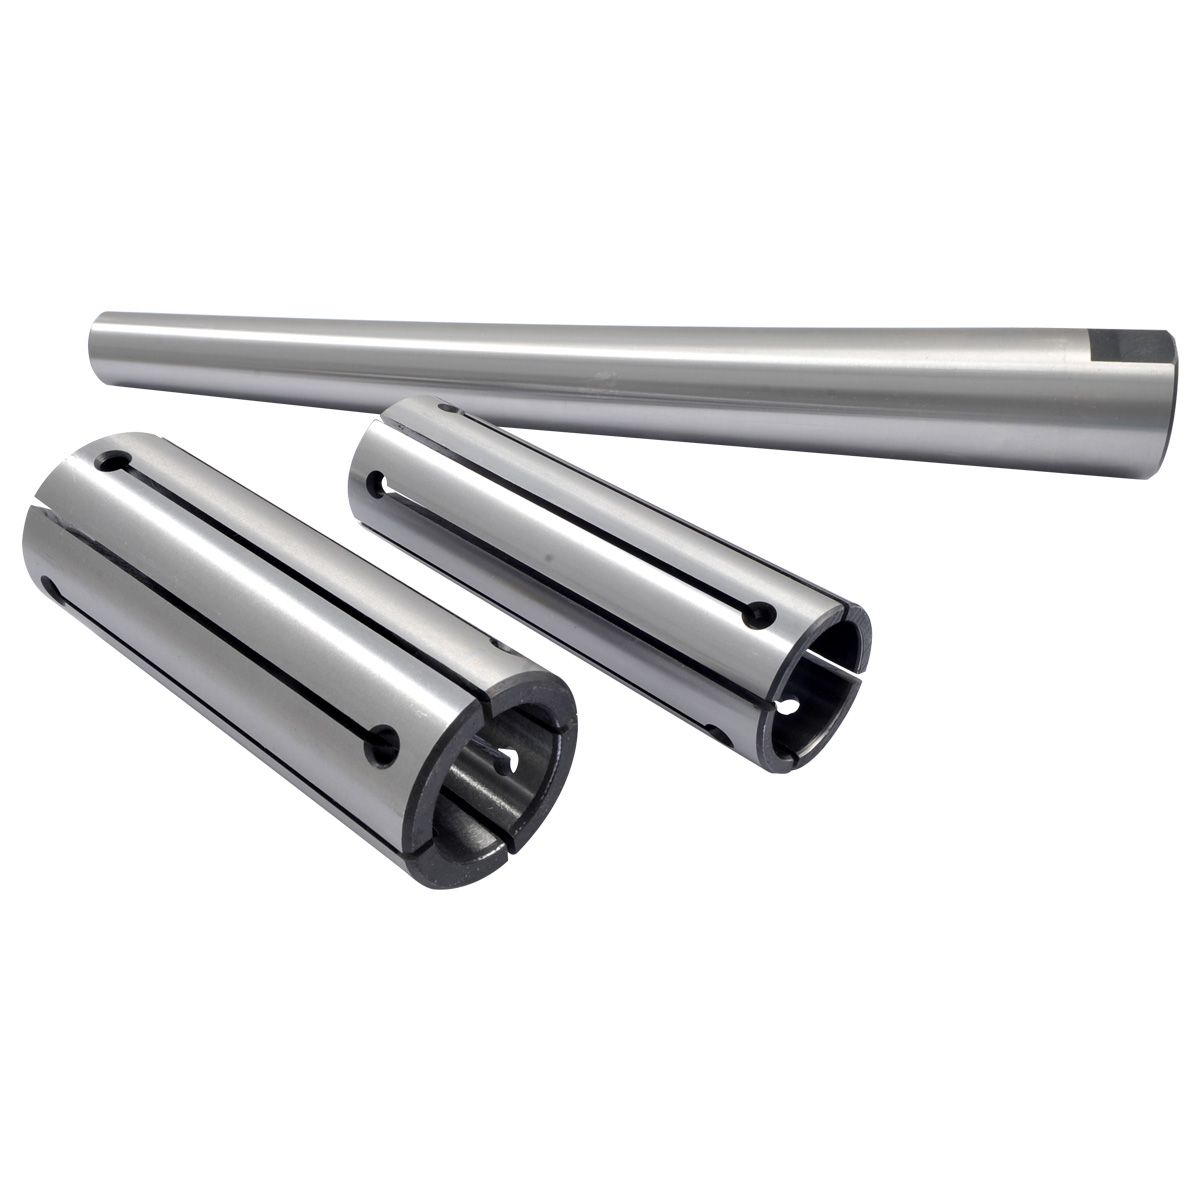 1-1/4-1-1/2 X 9" WITH 4" SLEEVE EXPANDING MANDREL (3 PIECE KIT) (3902-3062)